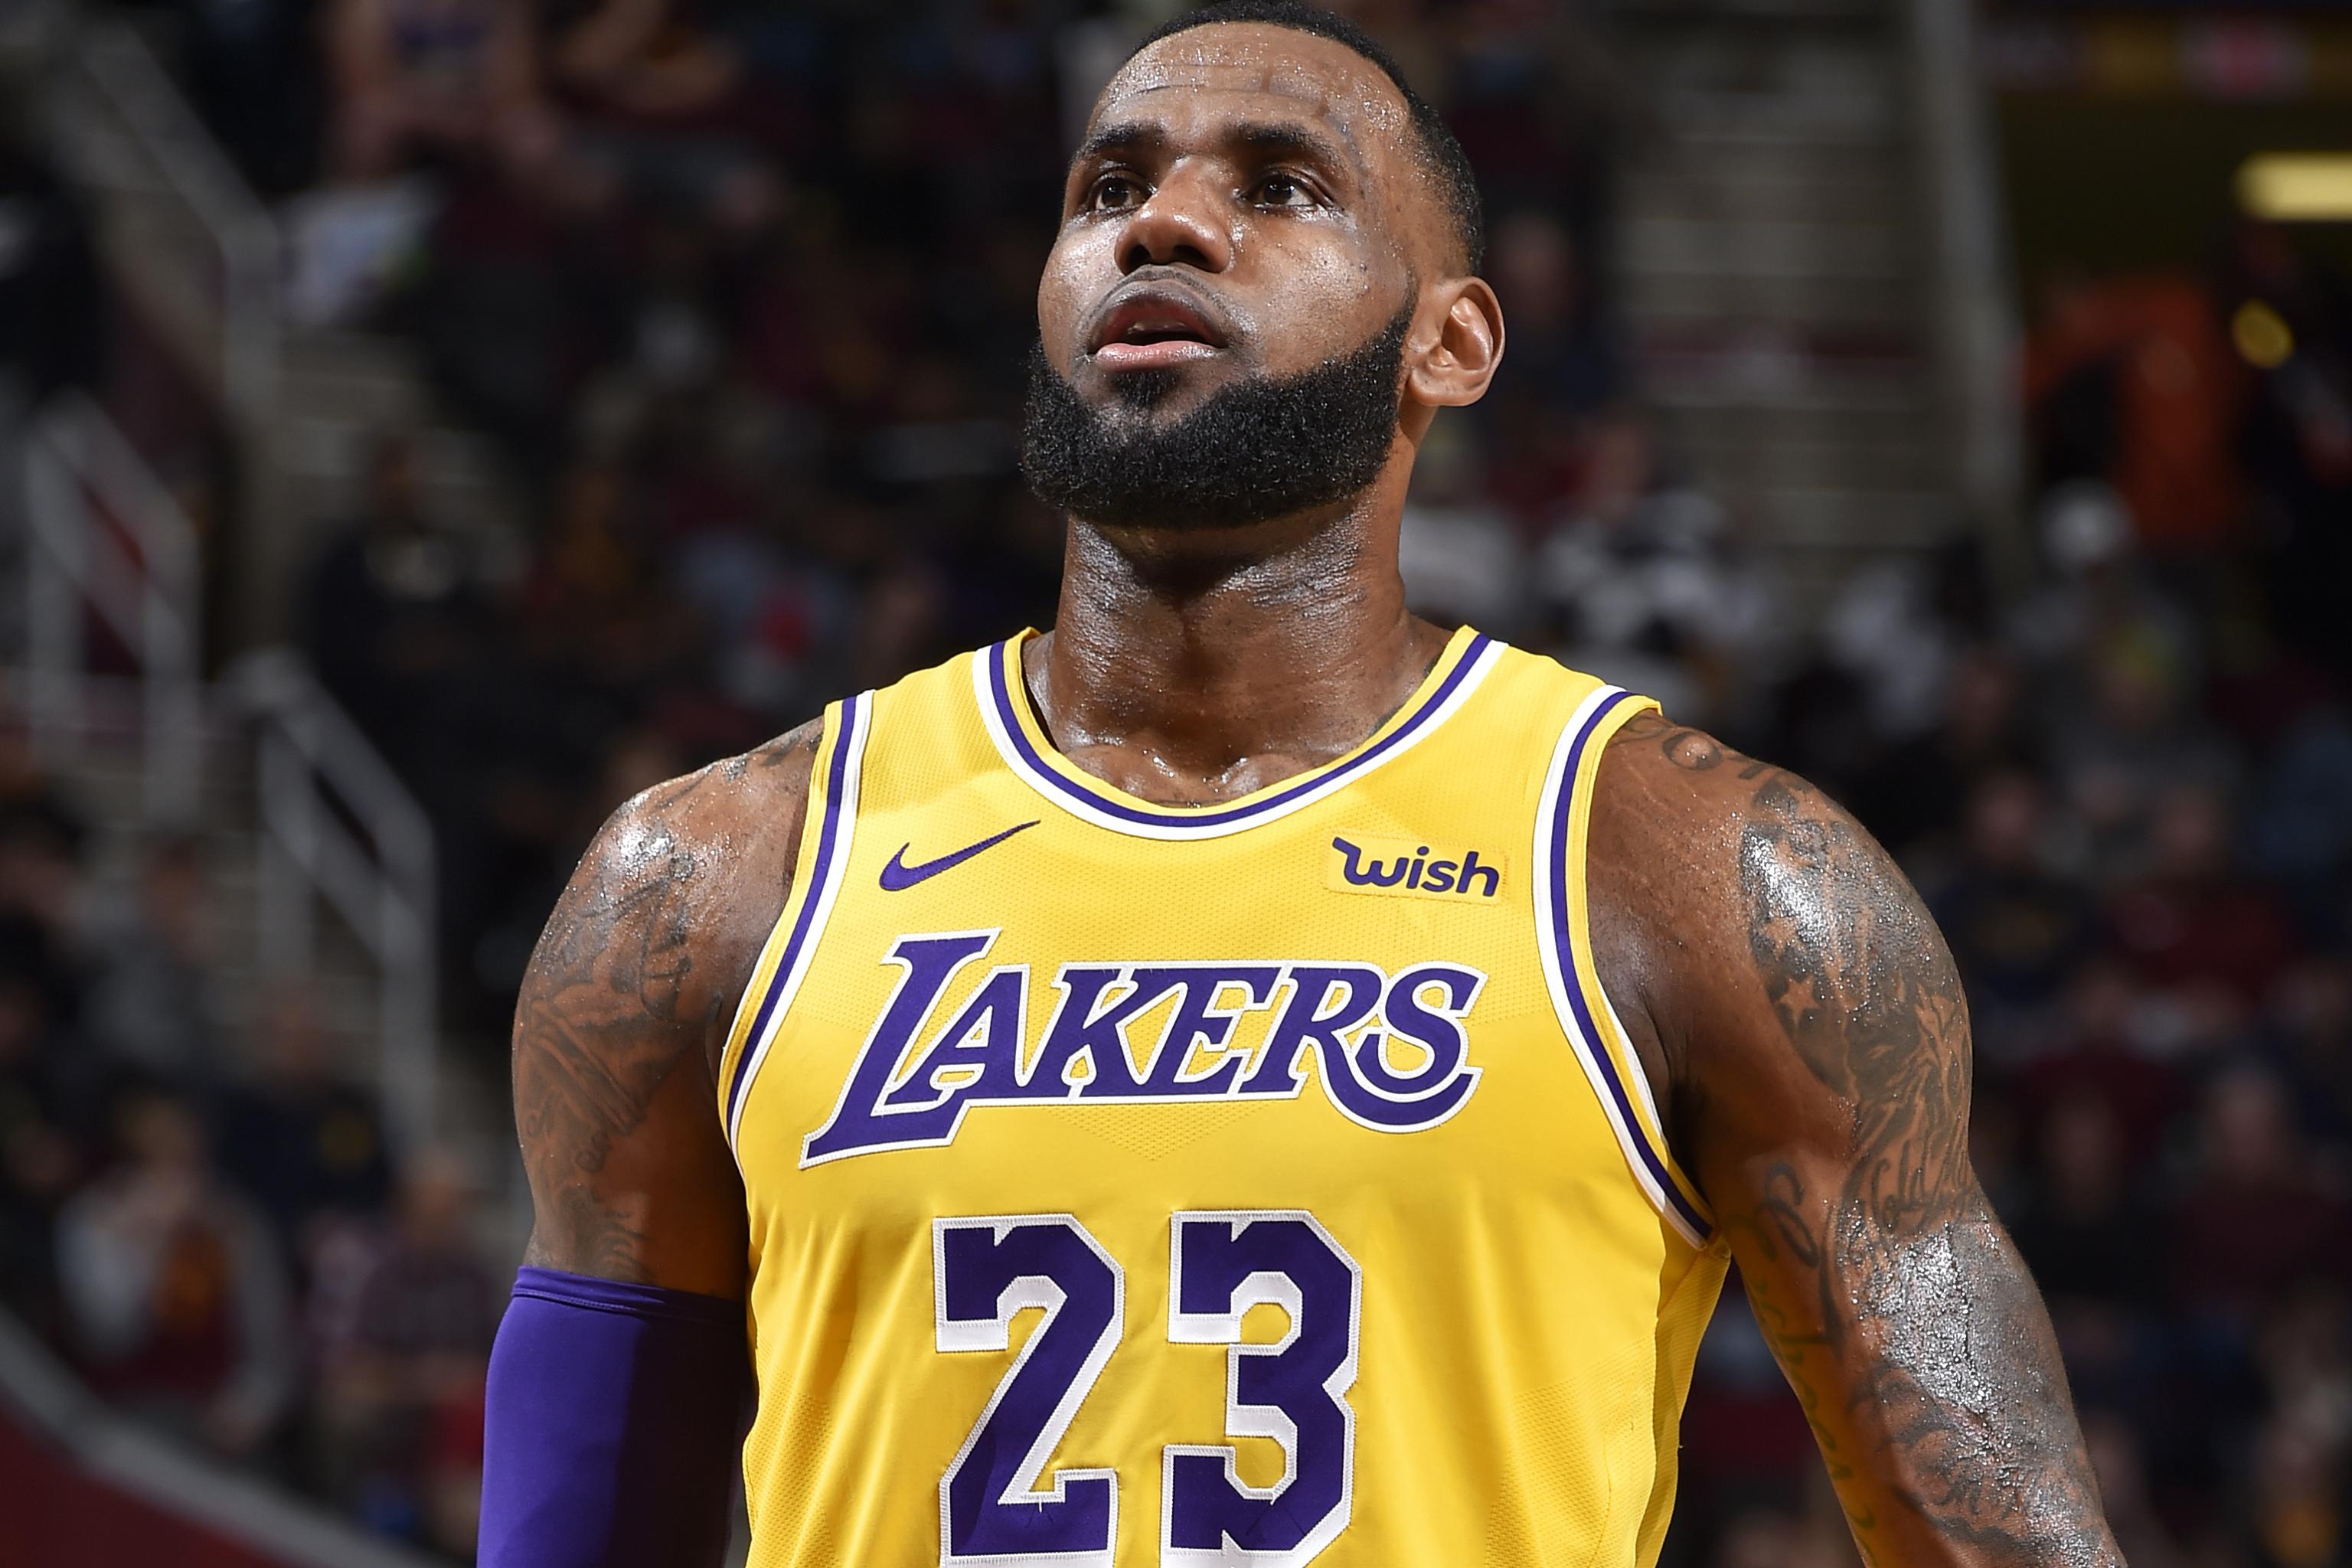 Nba Rumors Cavs Believed Lebron Would Leave For Lakers After Nba Title Win Bleacher Report Latest News Videos And Highlights